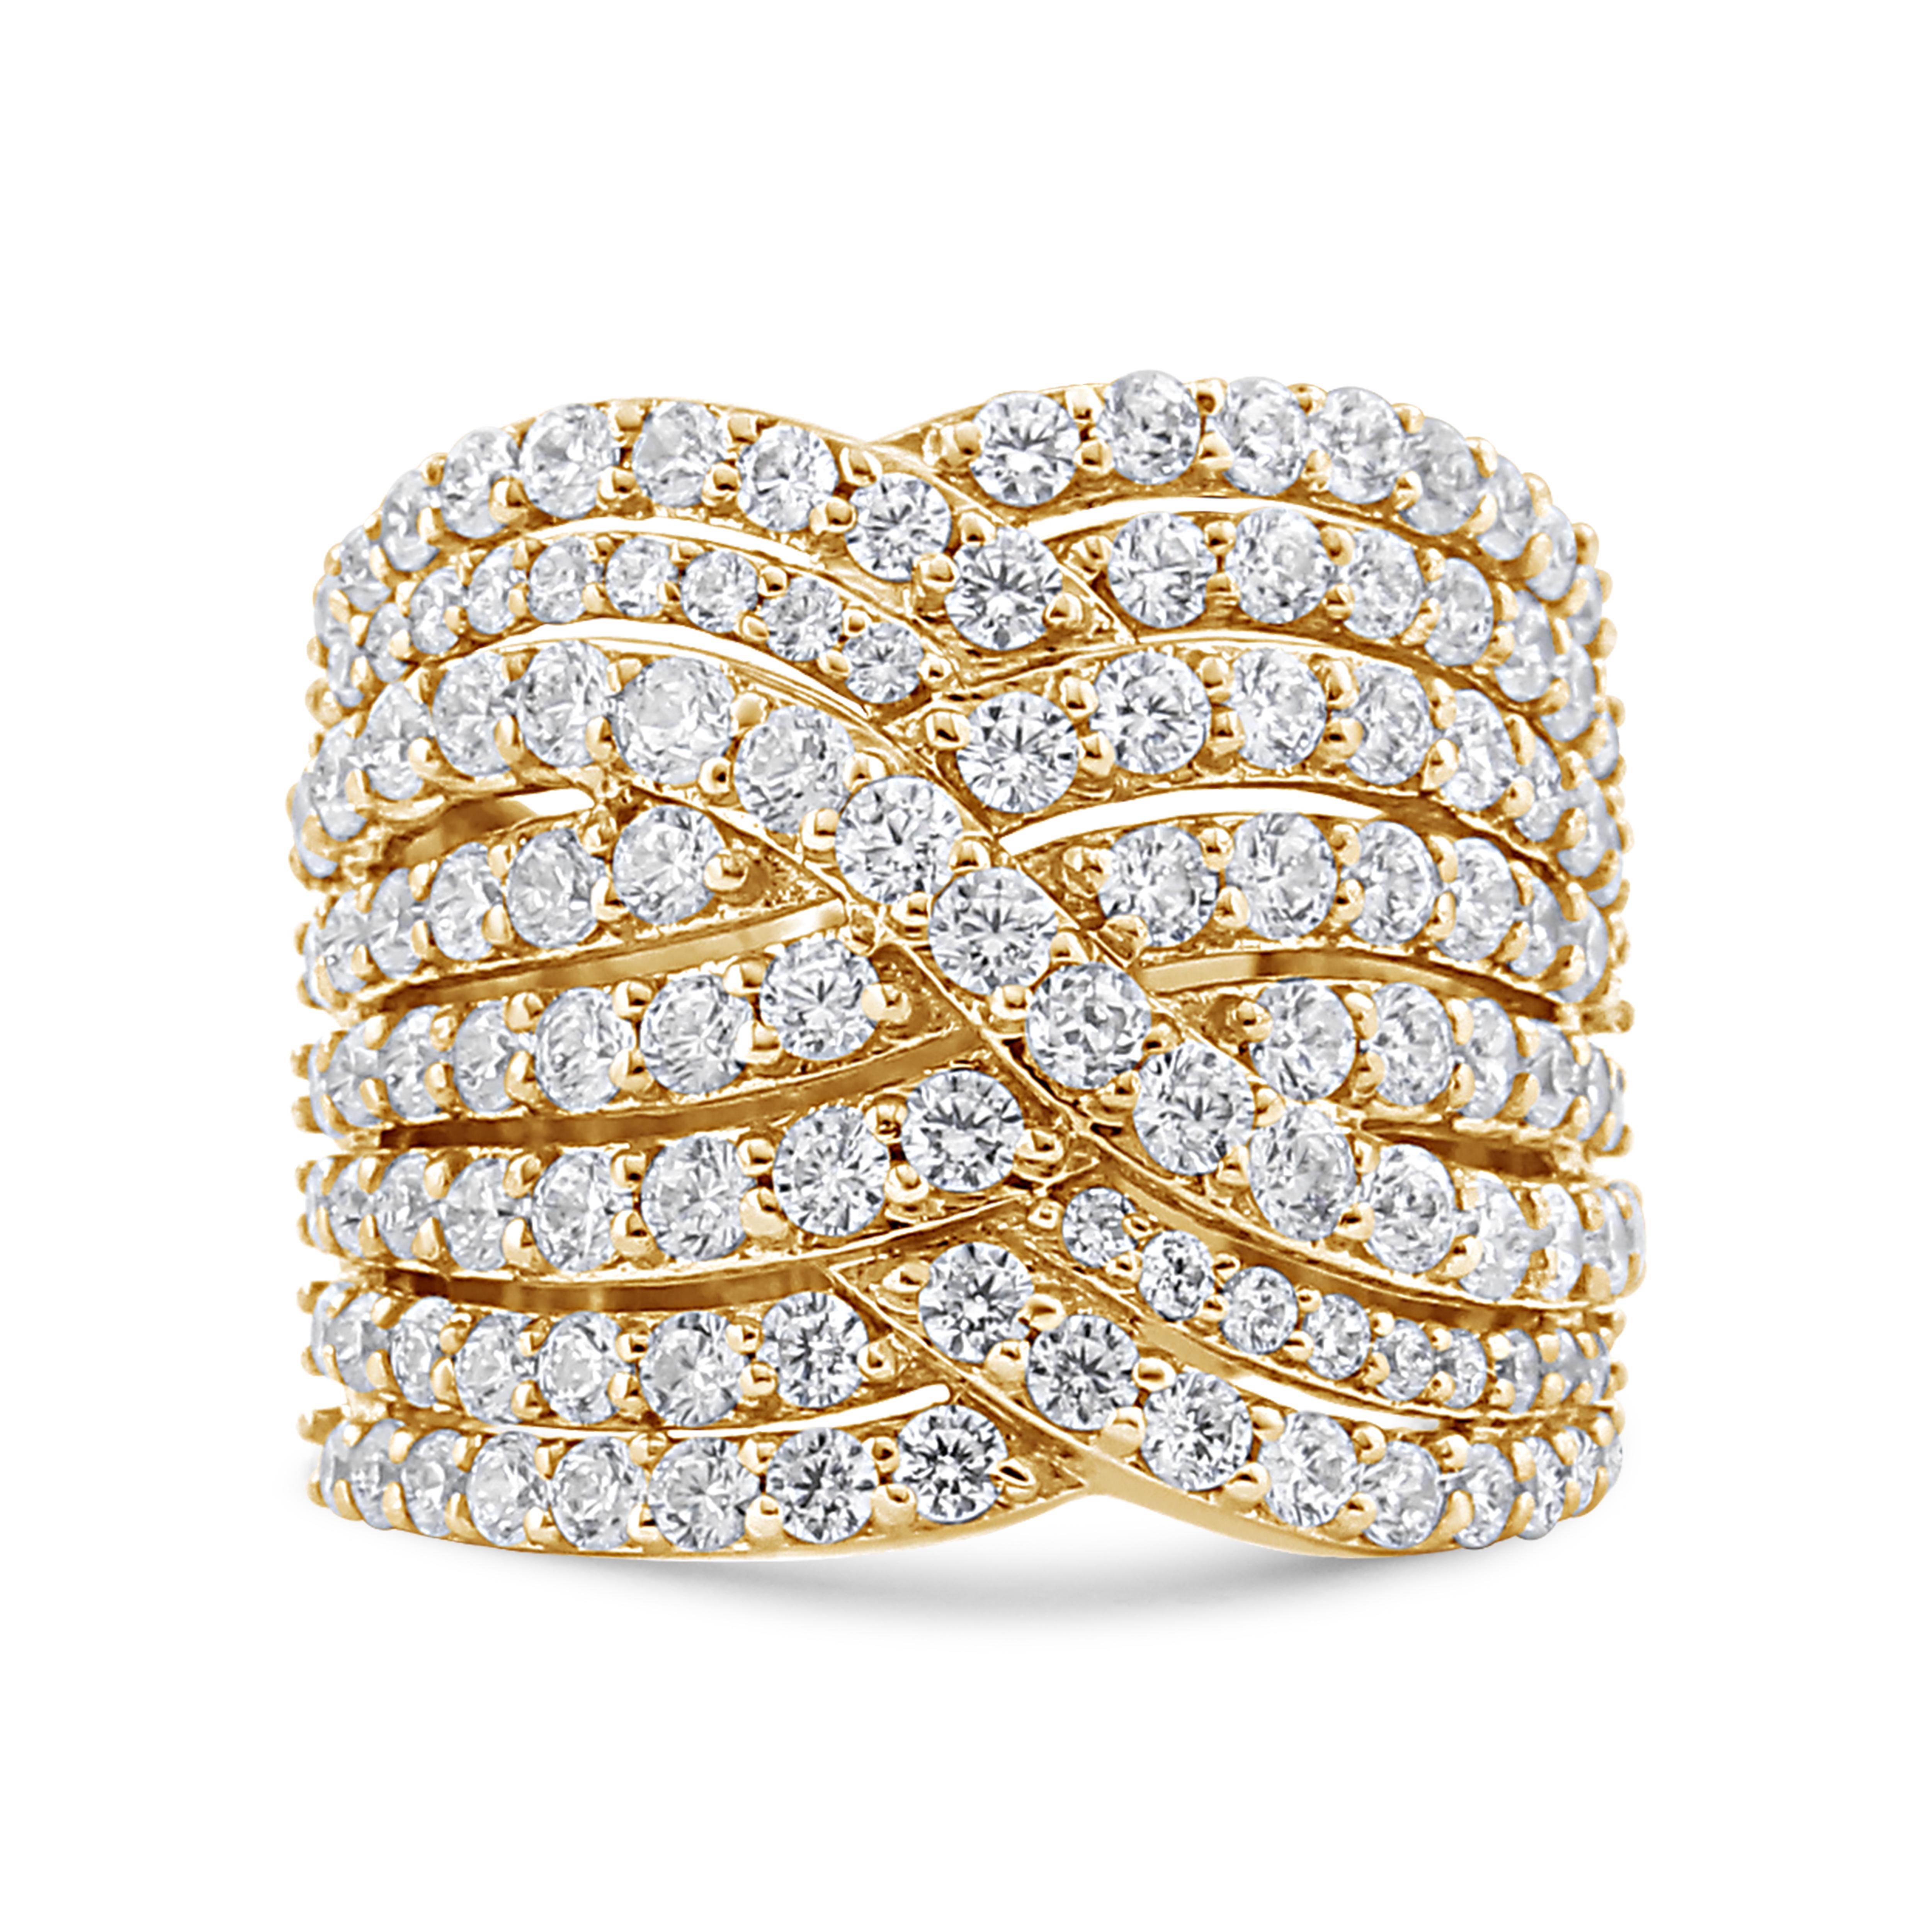 Multi rows of round, prong-set diamonds in a bypass motif create this exquisitely designed ring of gleaming 10k yellow gold that makes this piece a wardrobe staple for years to come. Go for the wow-factor with this dazzling multi-row ring